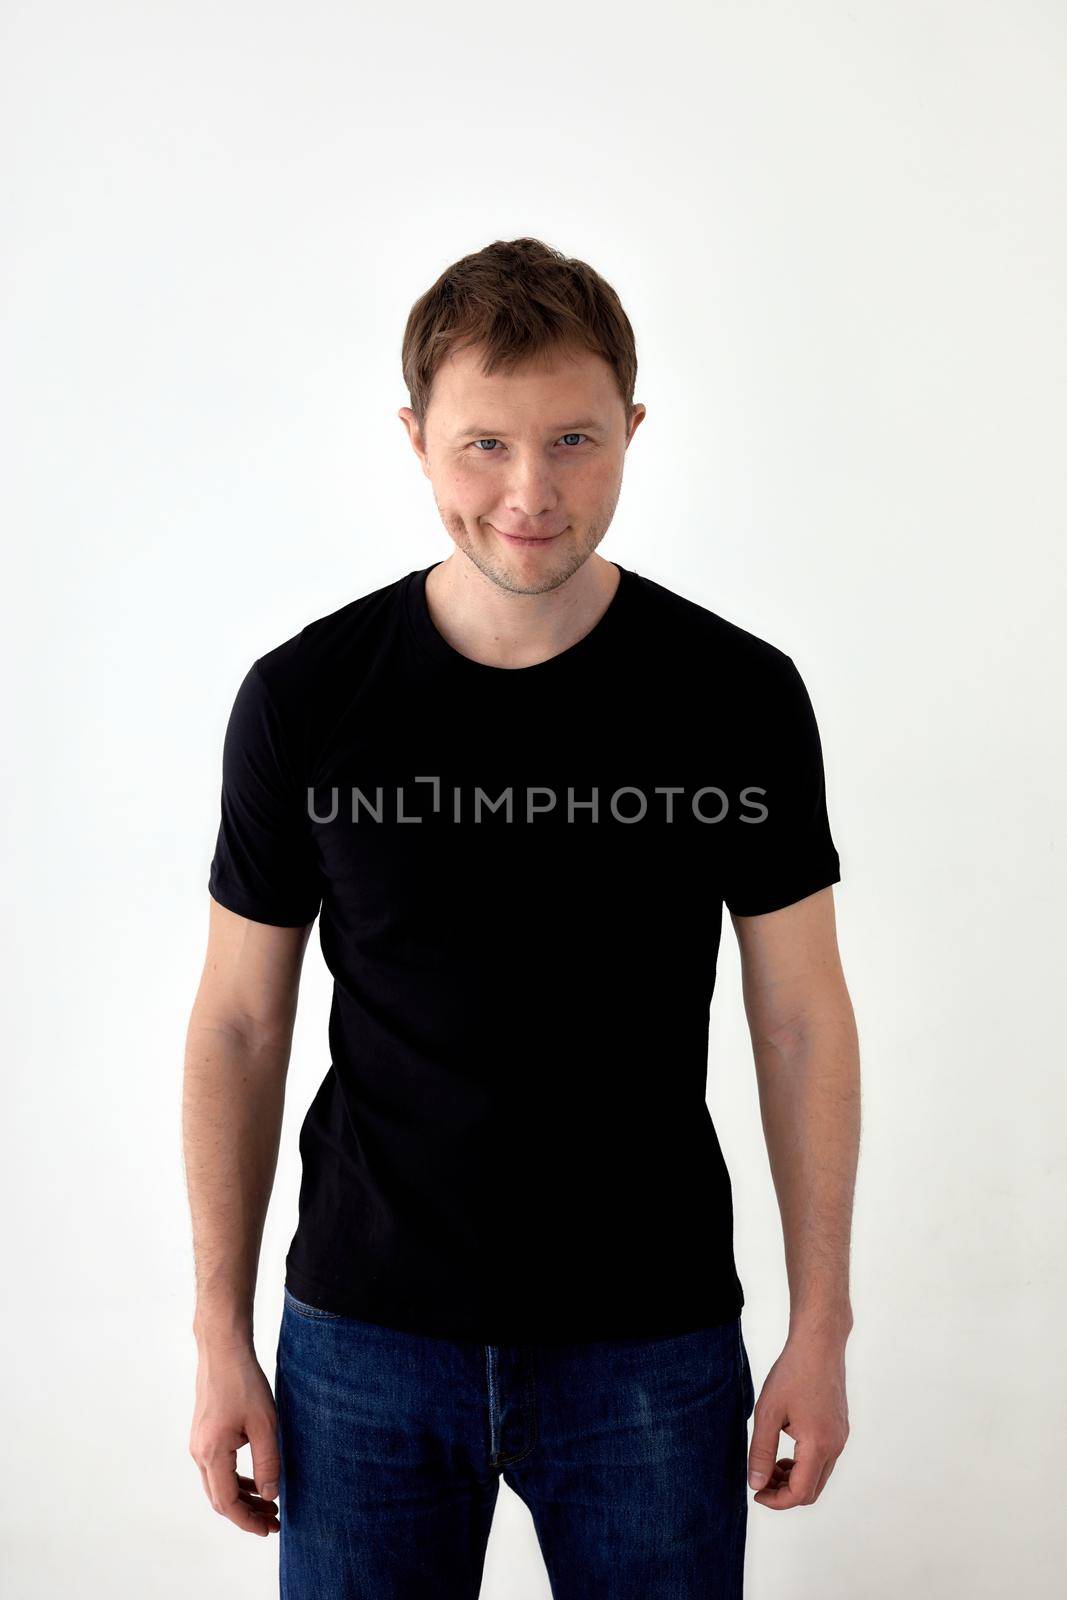 Glad young male in jeans and black t shirt standing against white background and looking at camera